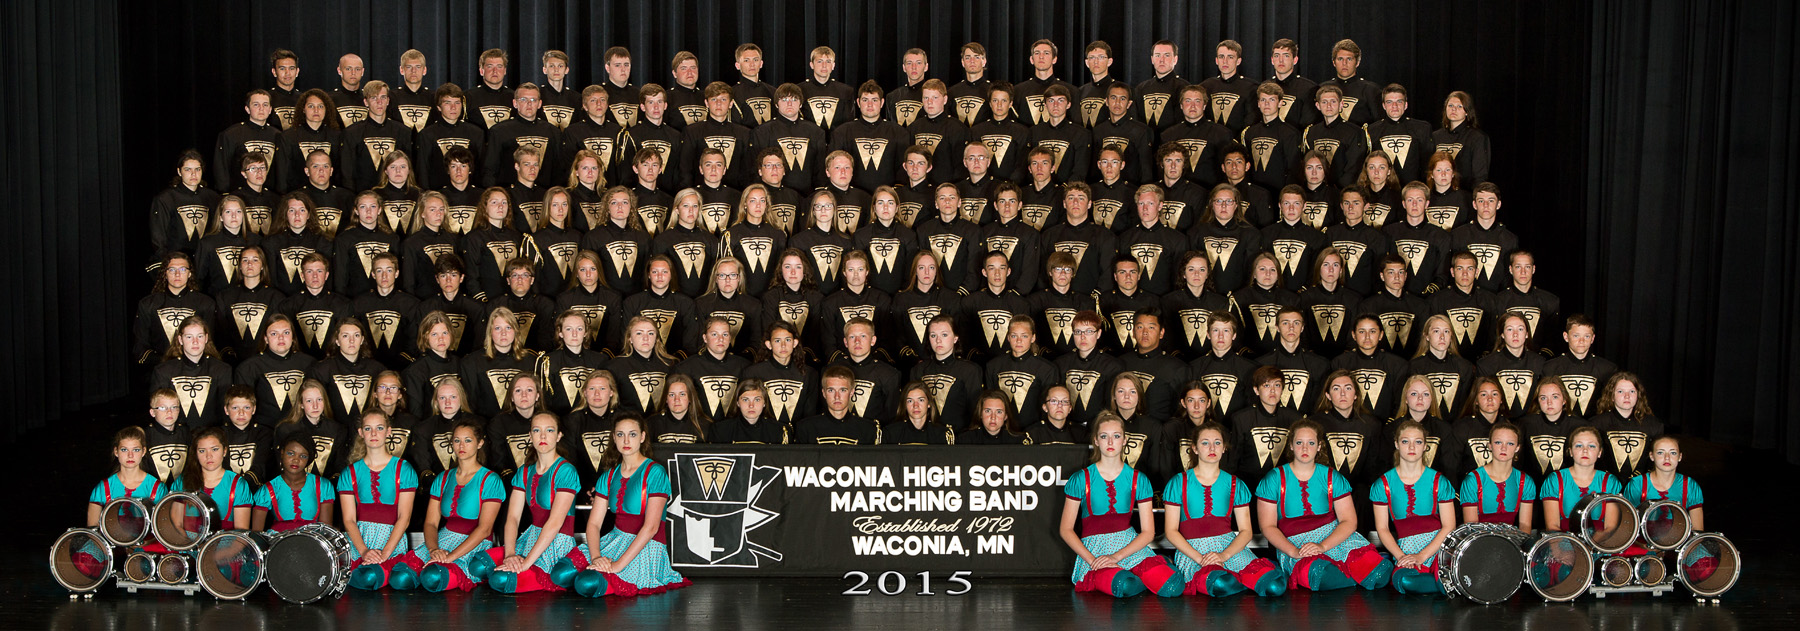 marching band poster 2015